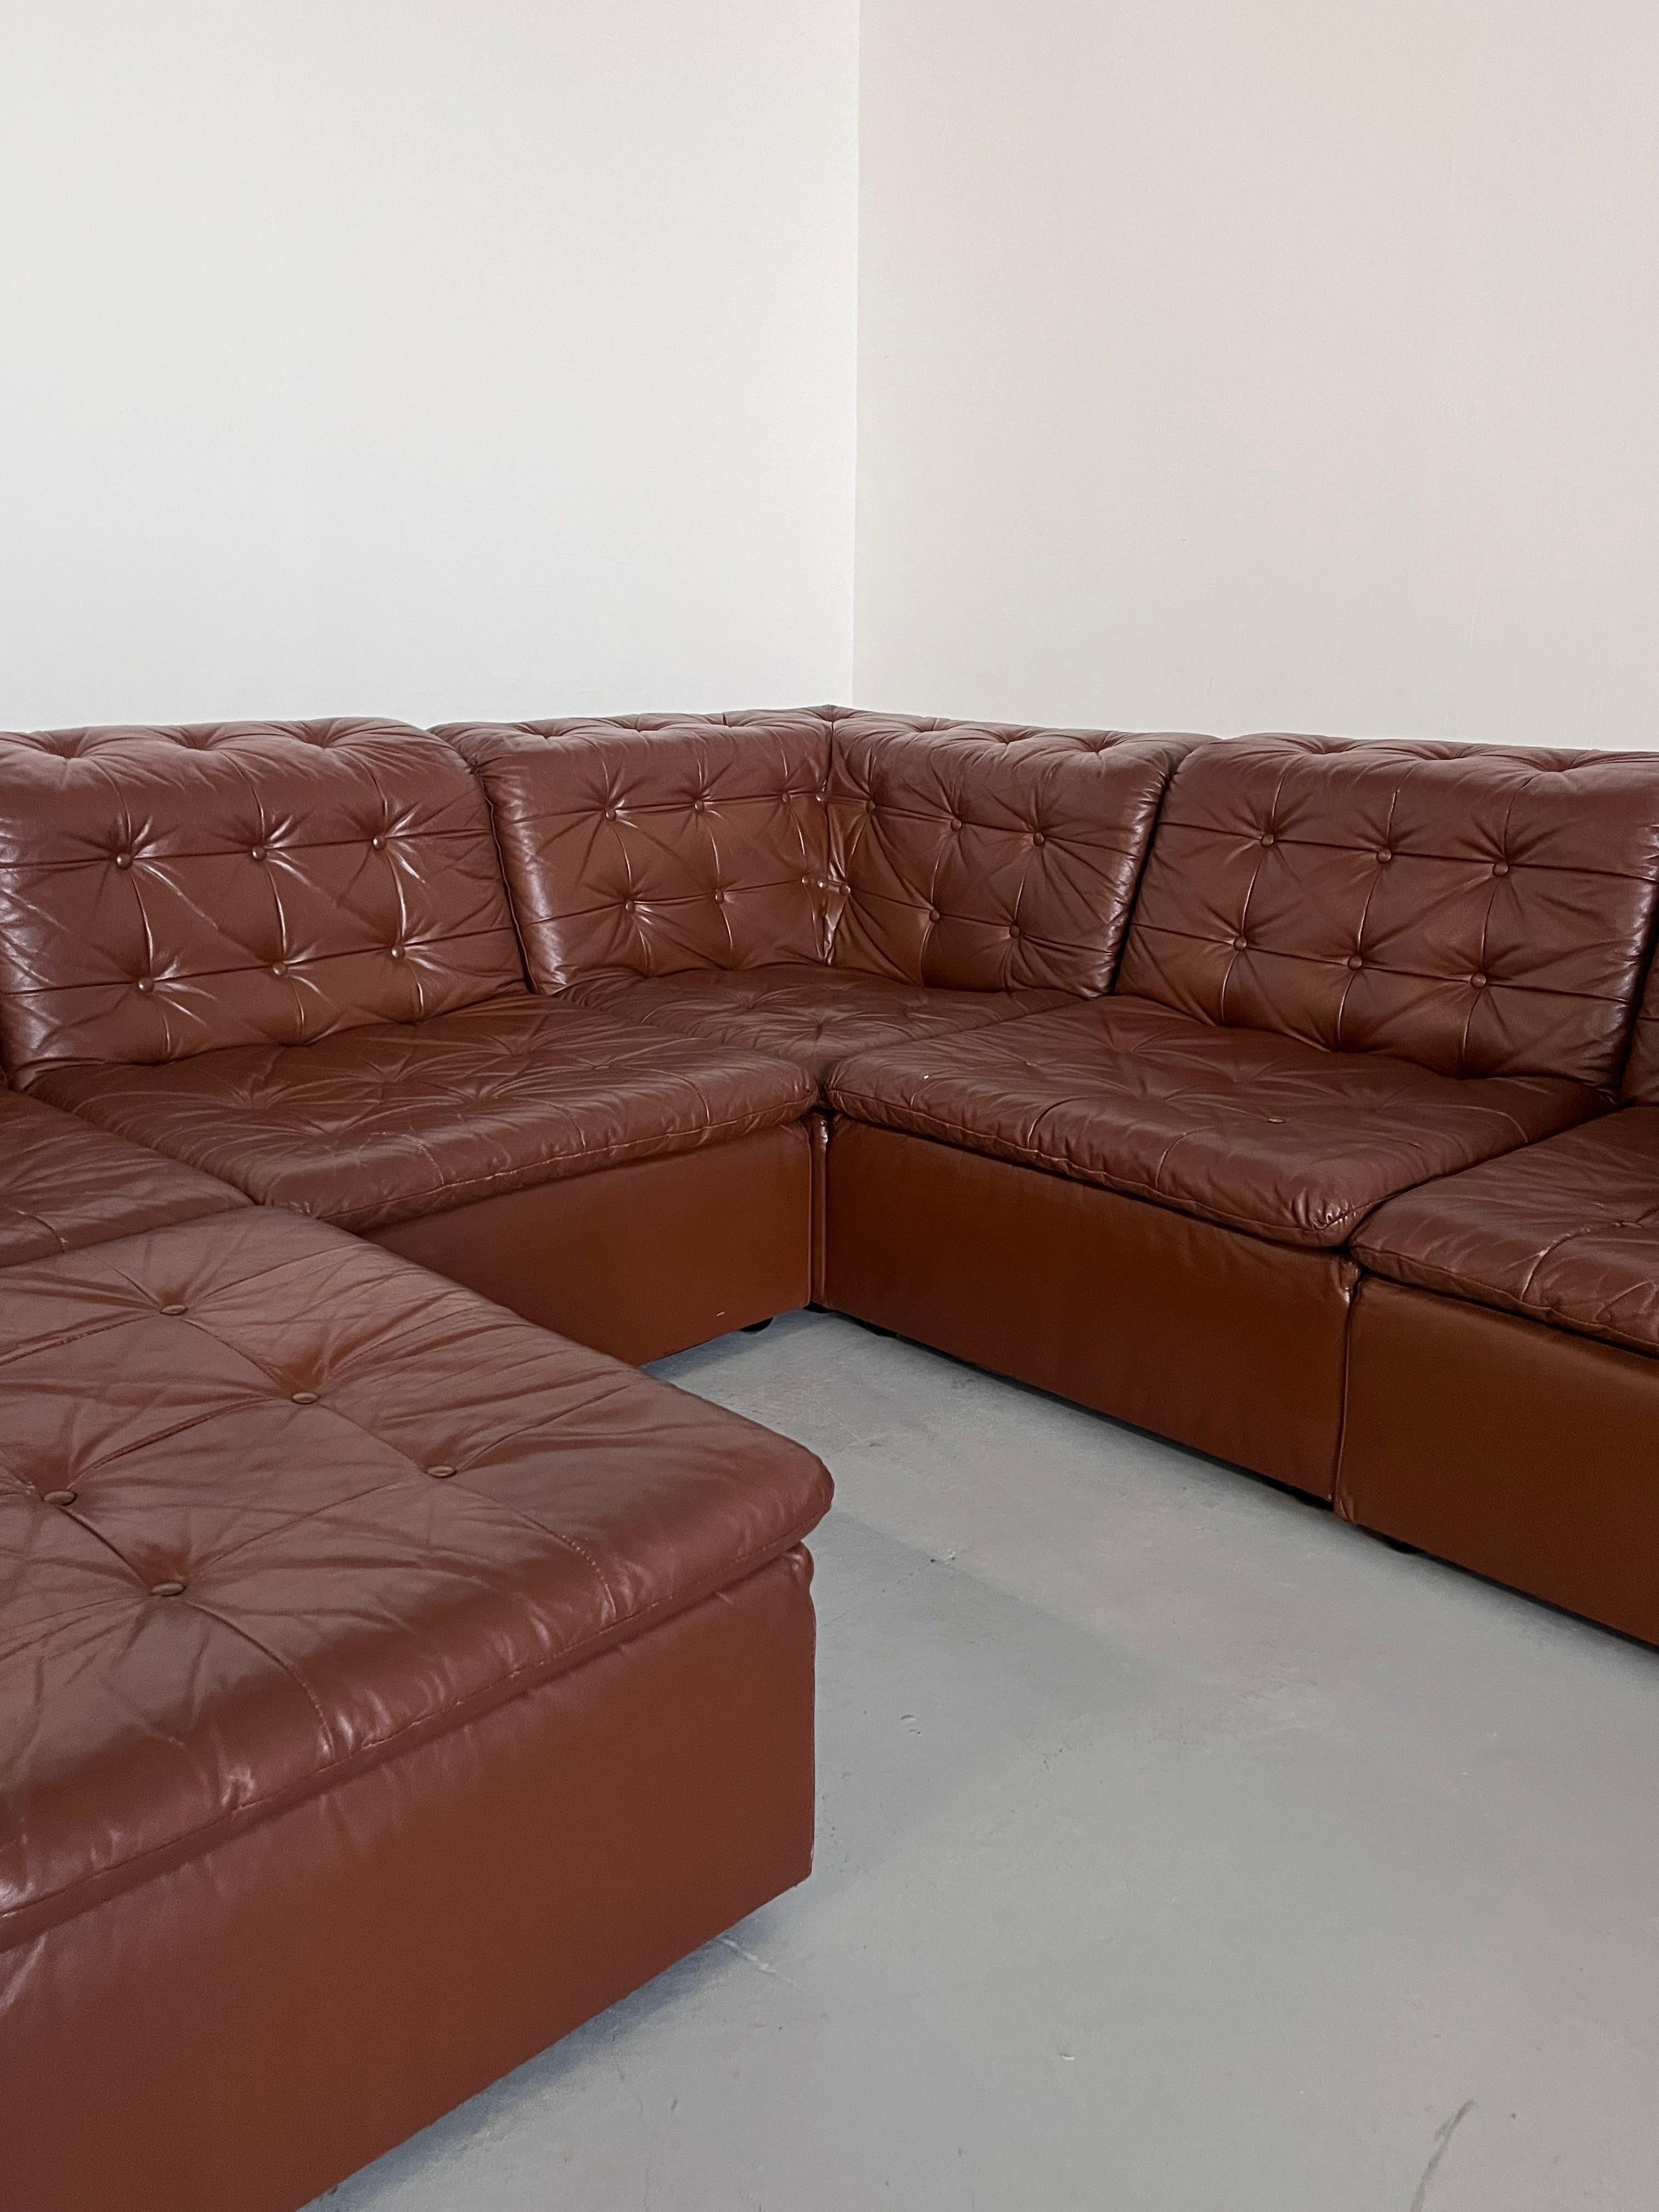 Vintage Patchwork Cognac Leather Six-Part Modular Sofa by Laauser, 1970s Germany For Sale 6